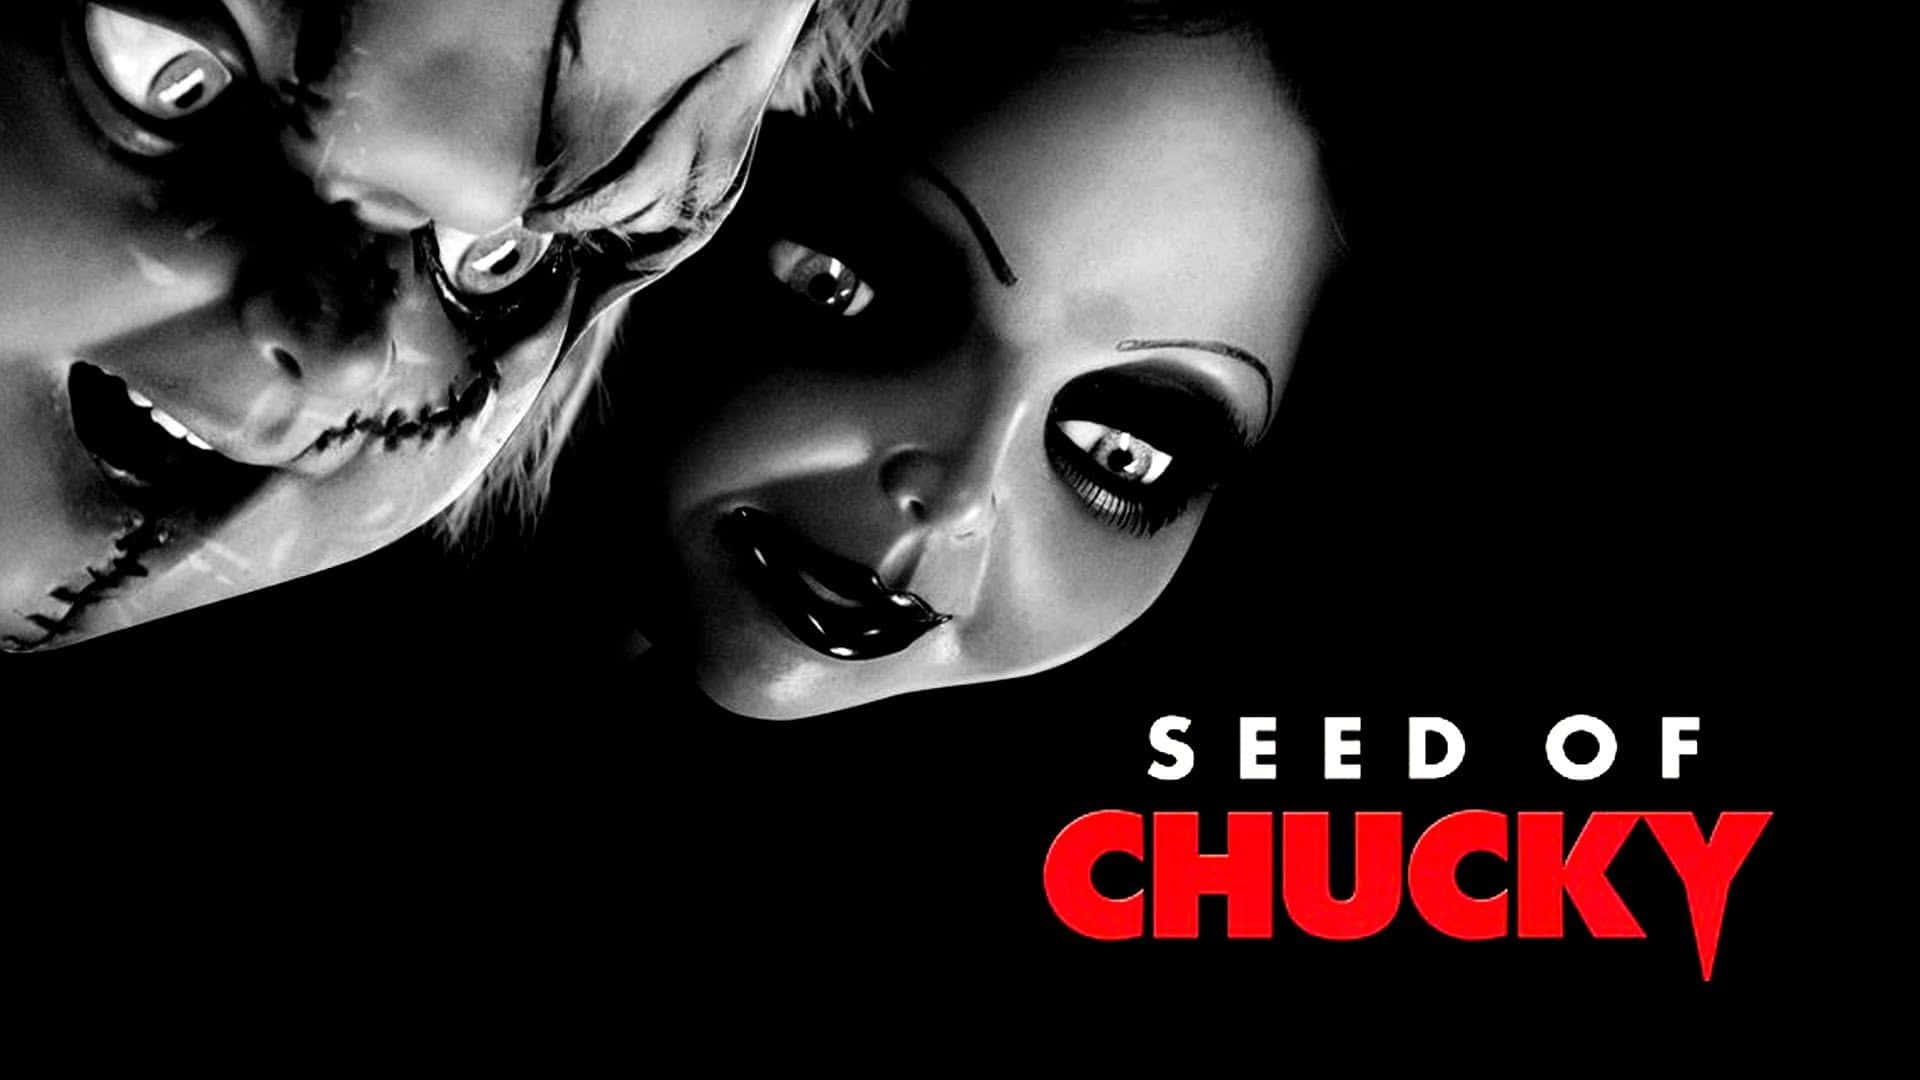 Seed Of Chucky - A Horror Movie